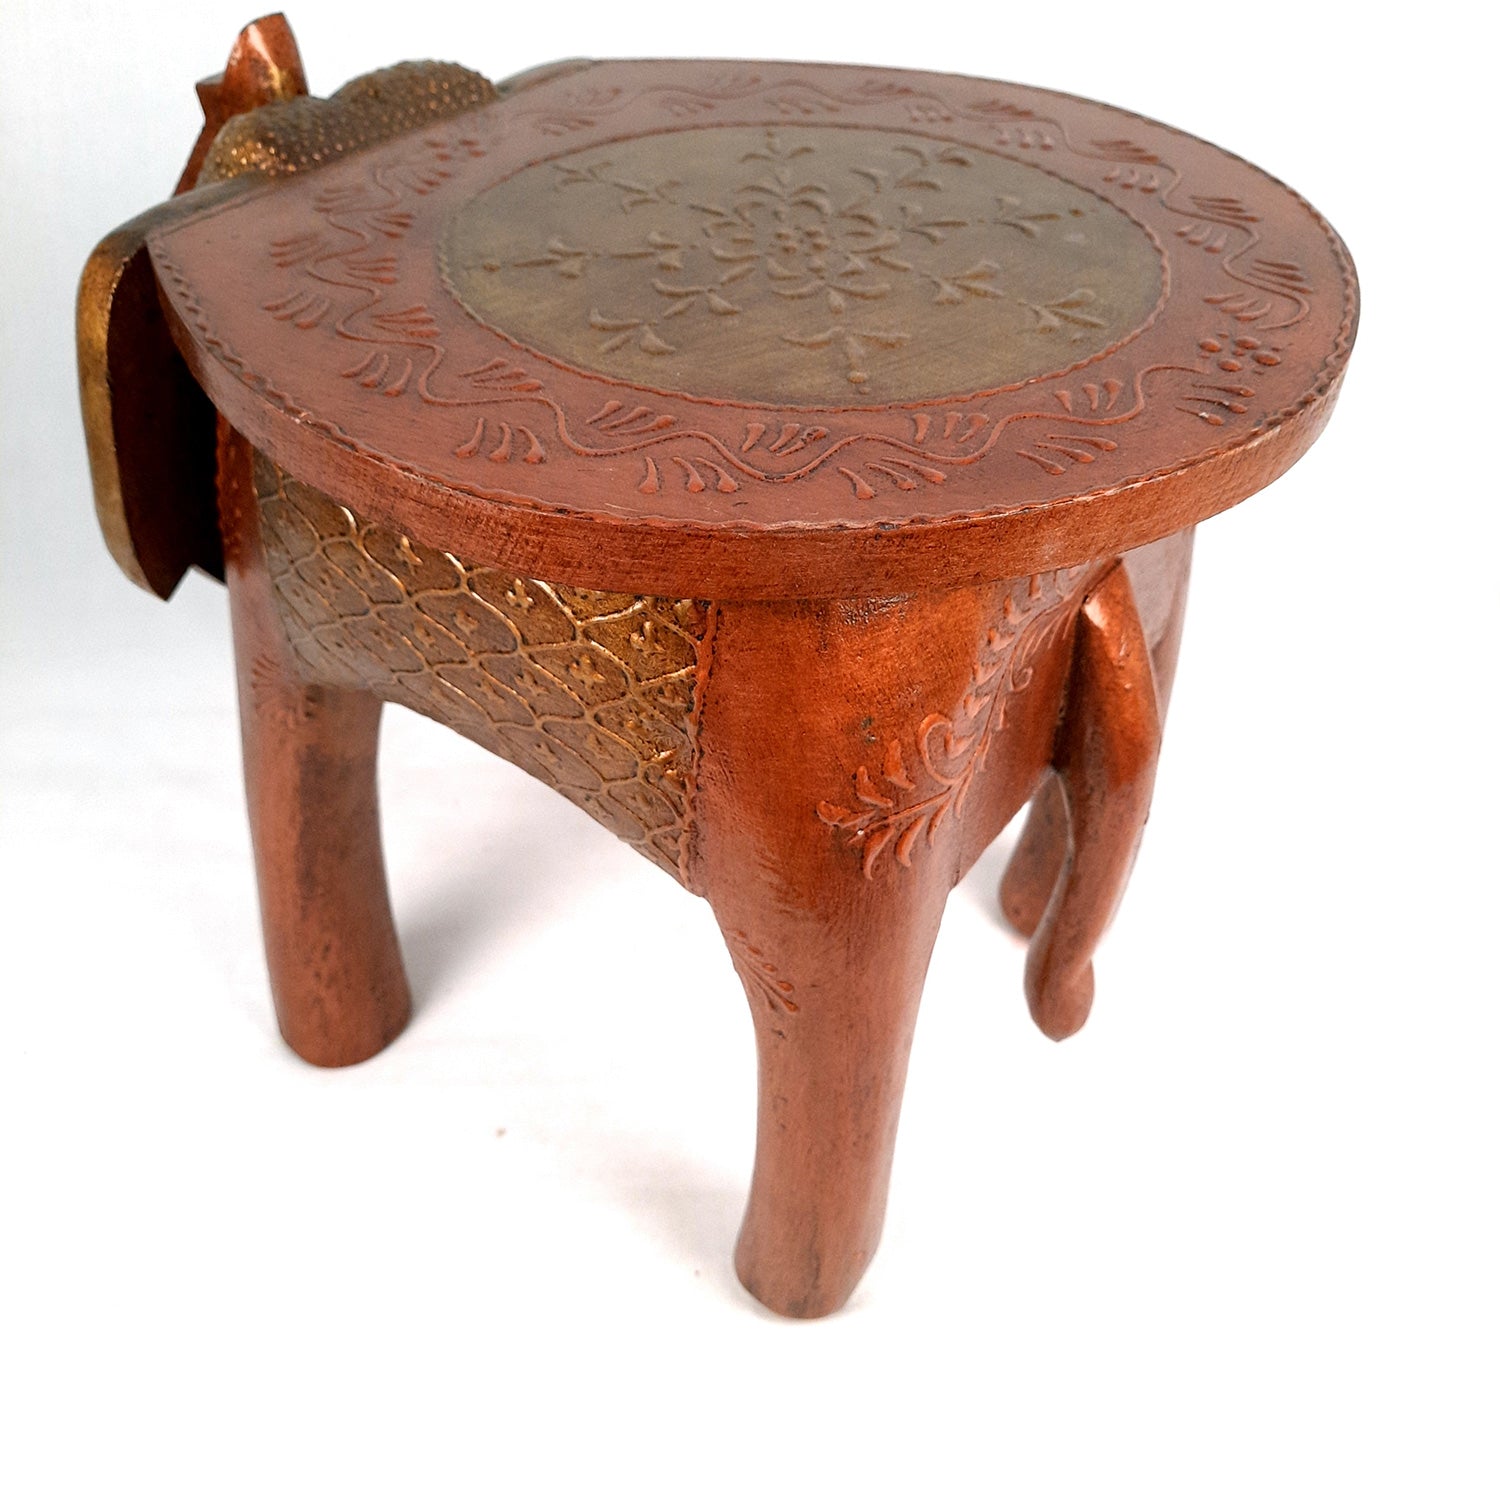 Side Table Cum Stool - Elephant Design | Wooden Stools for Keeping Lamp, Vases & Plants - for Home Decor, Corners, Sofa Side Stool, Office & Gifts - 12 Inch - Apkamart